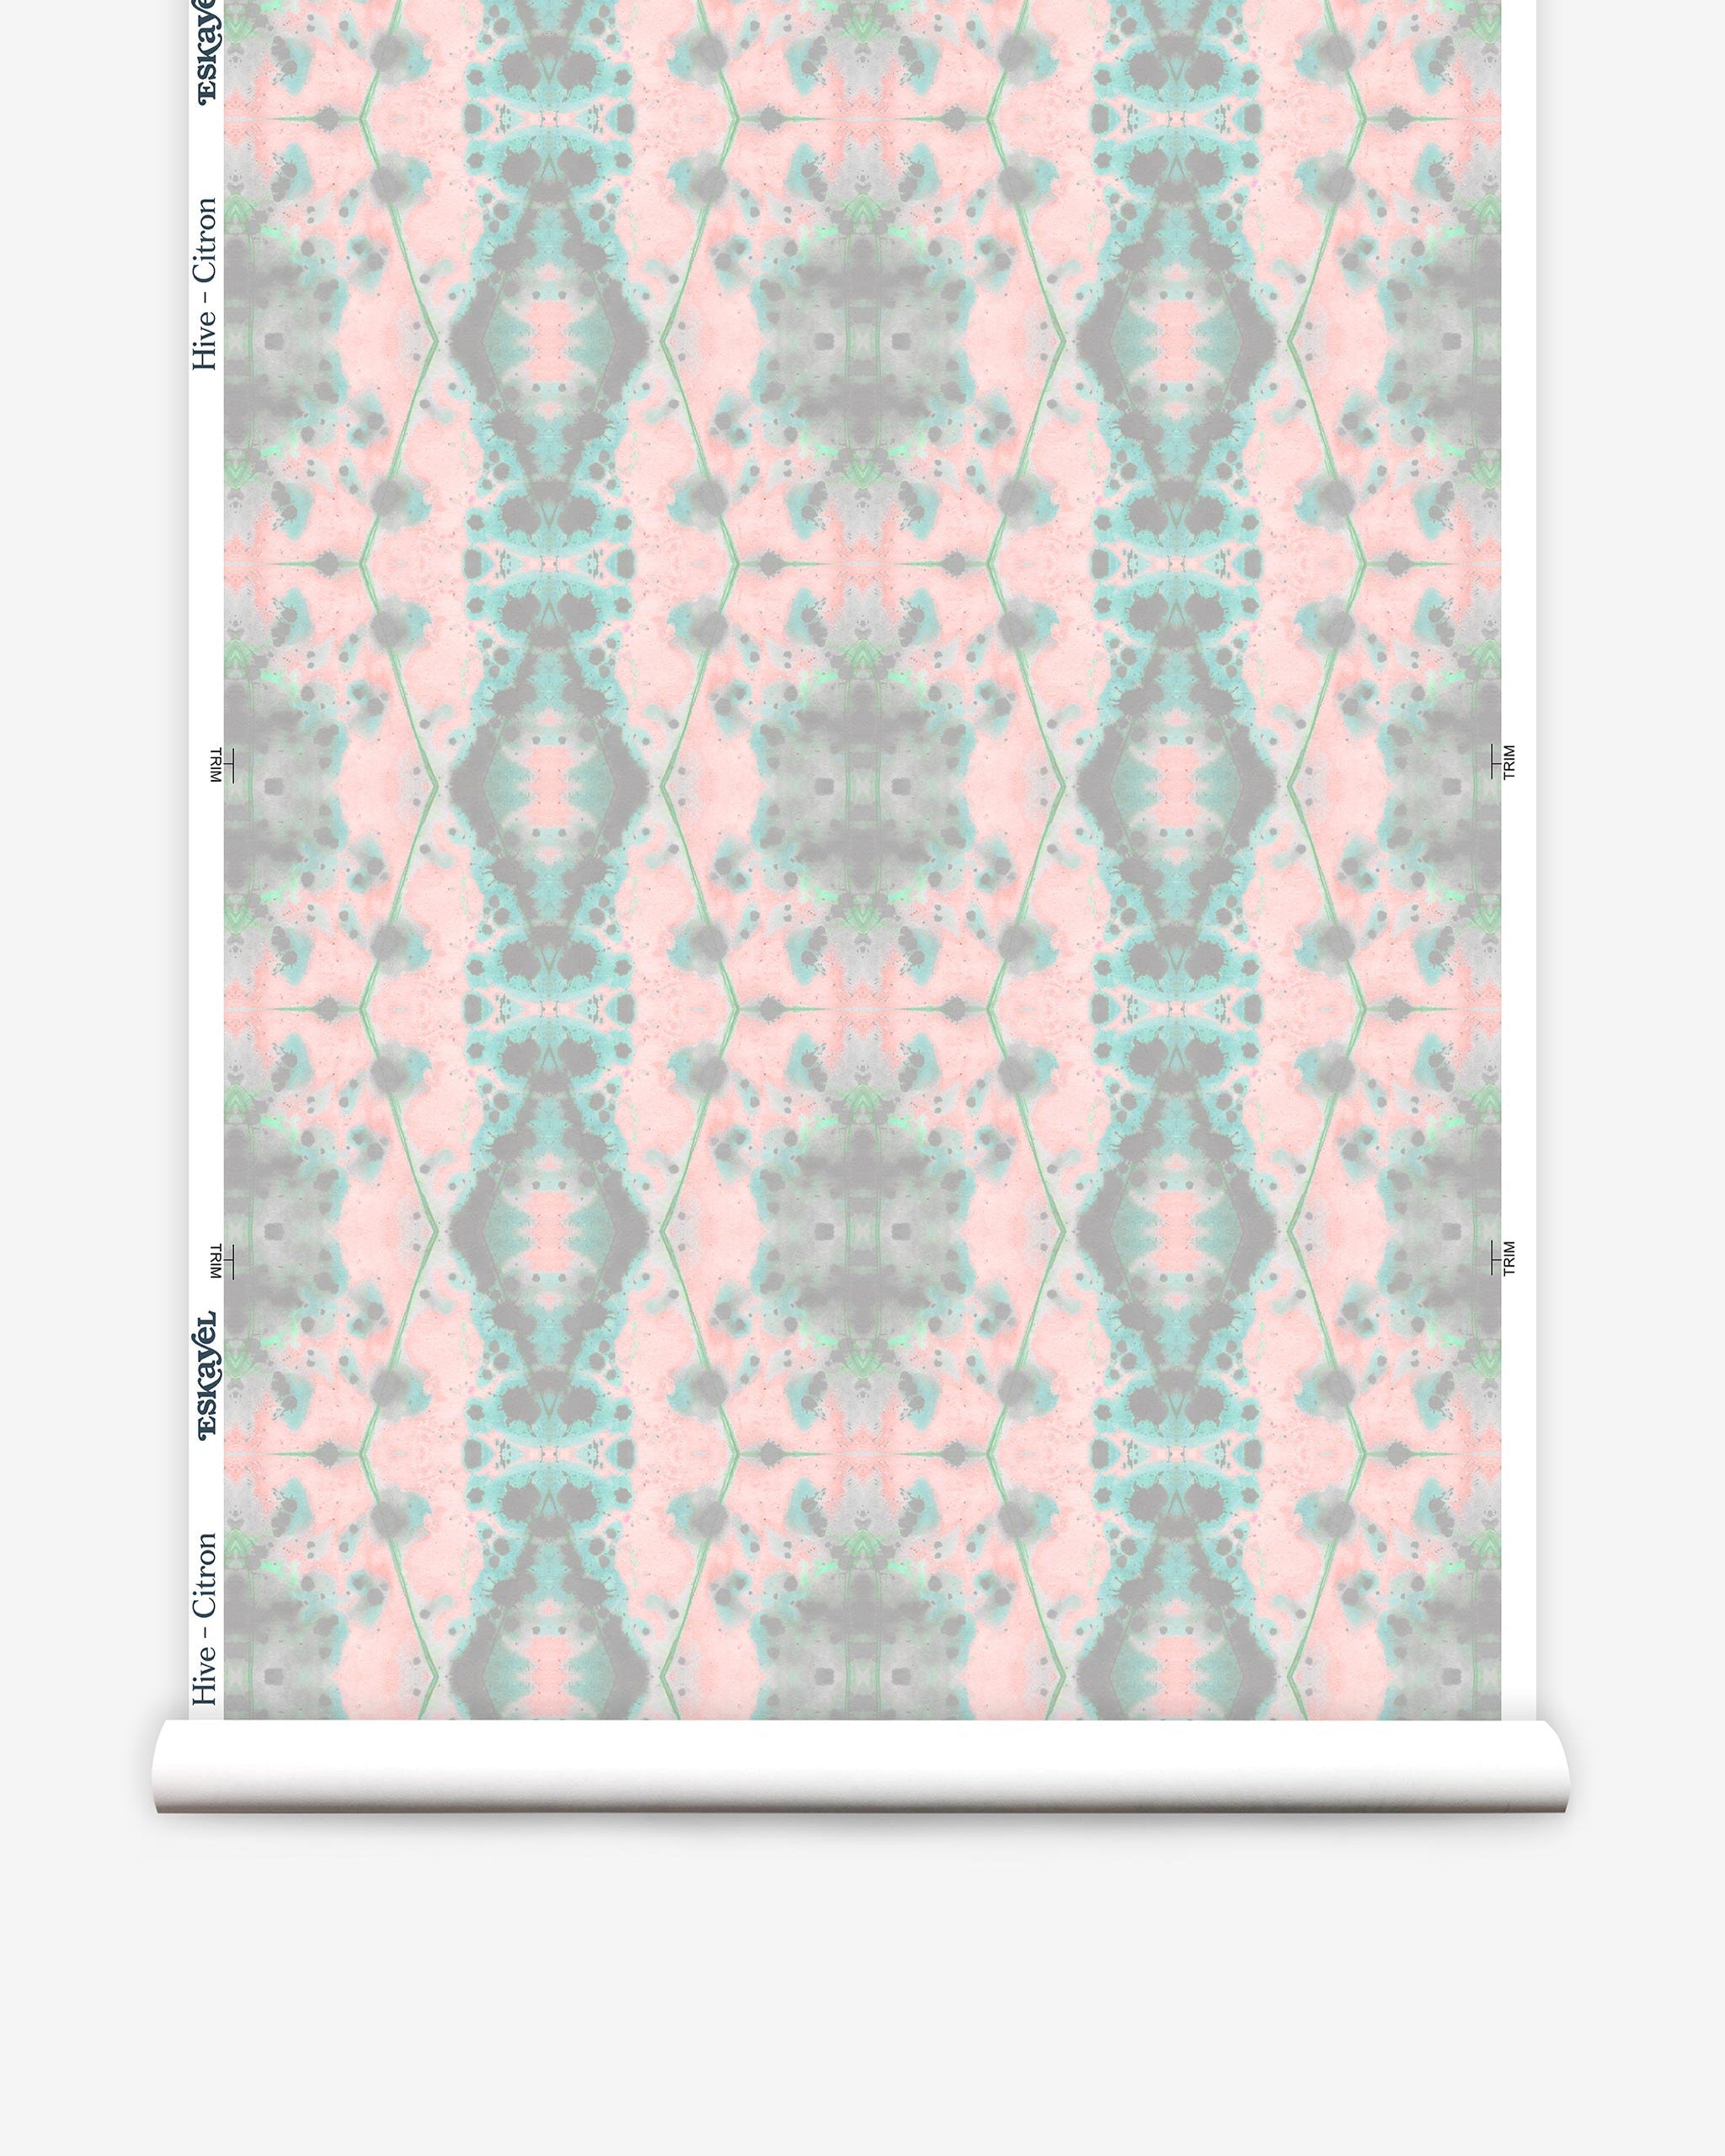 Partially unrolled wallpaper yardage in a painterly gometric stripe in gray, blue and green on a pink field.